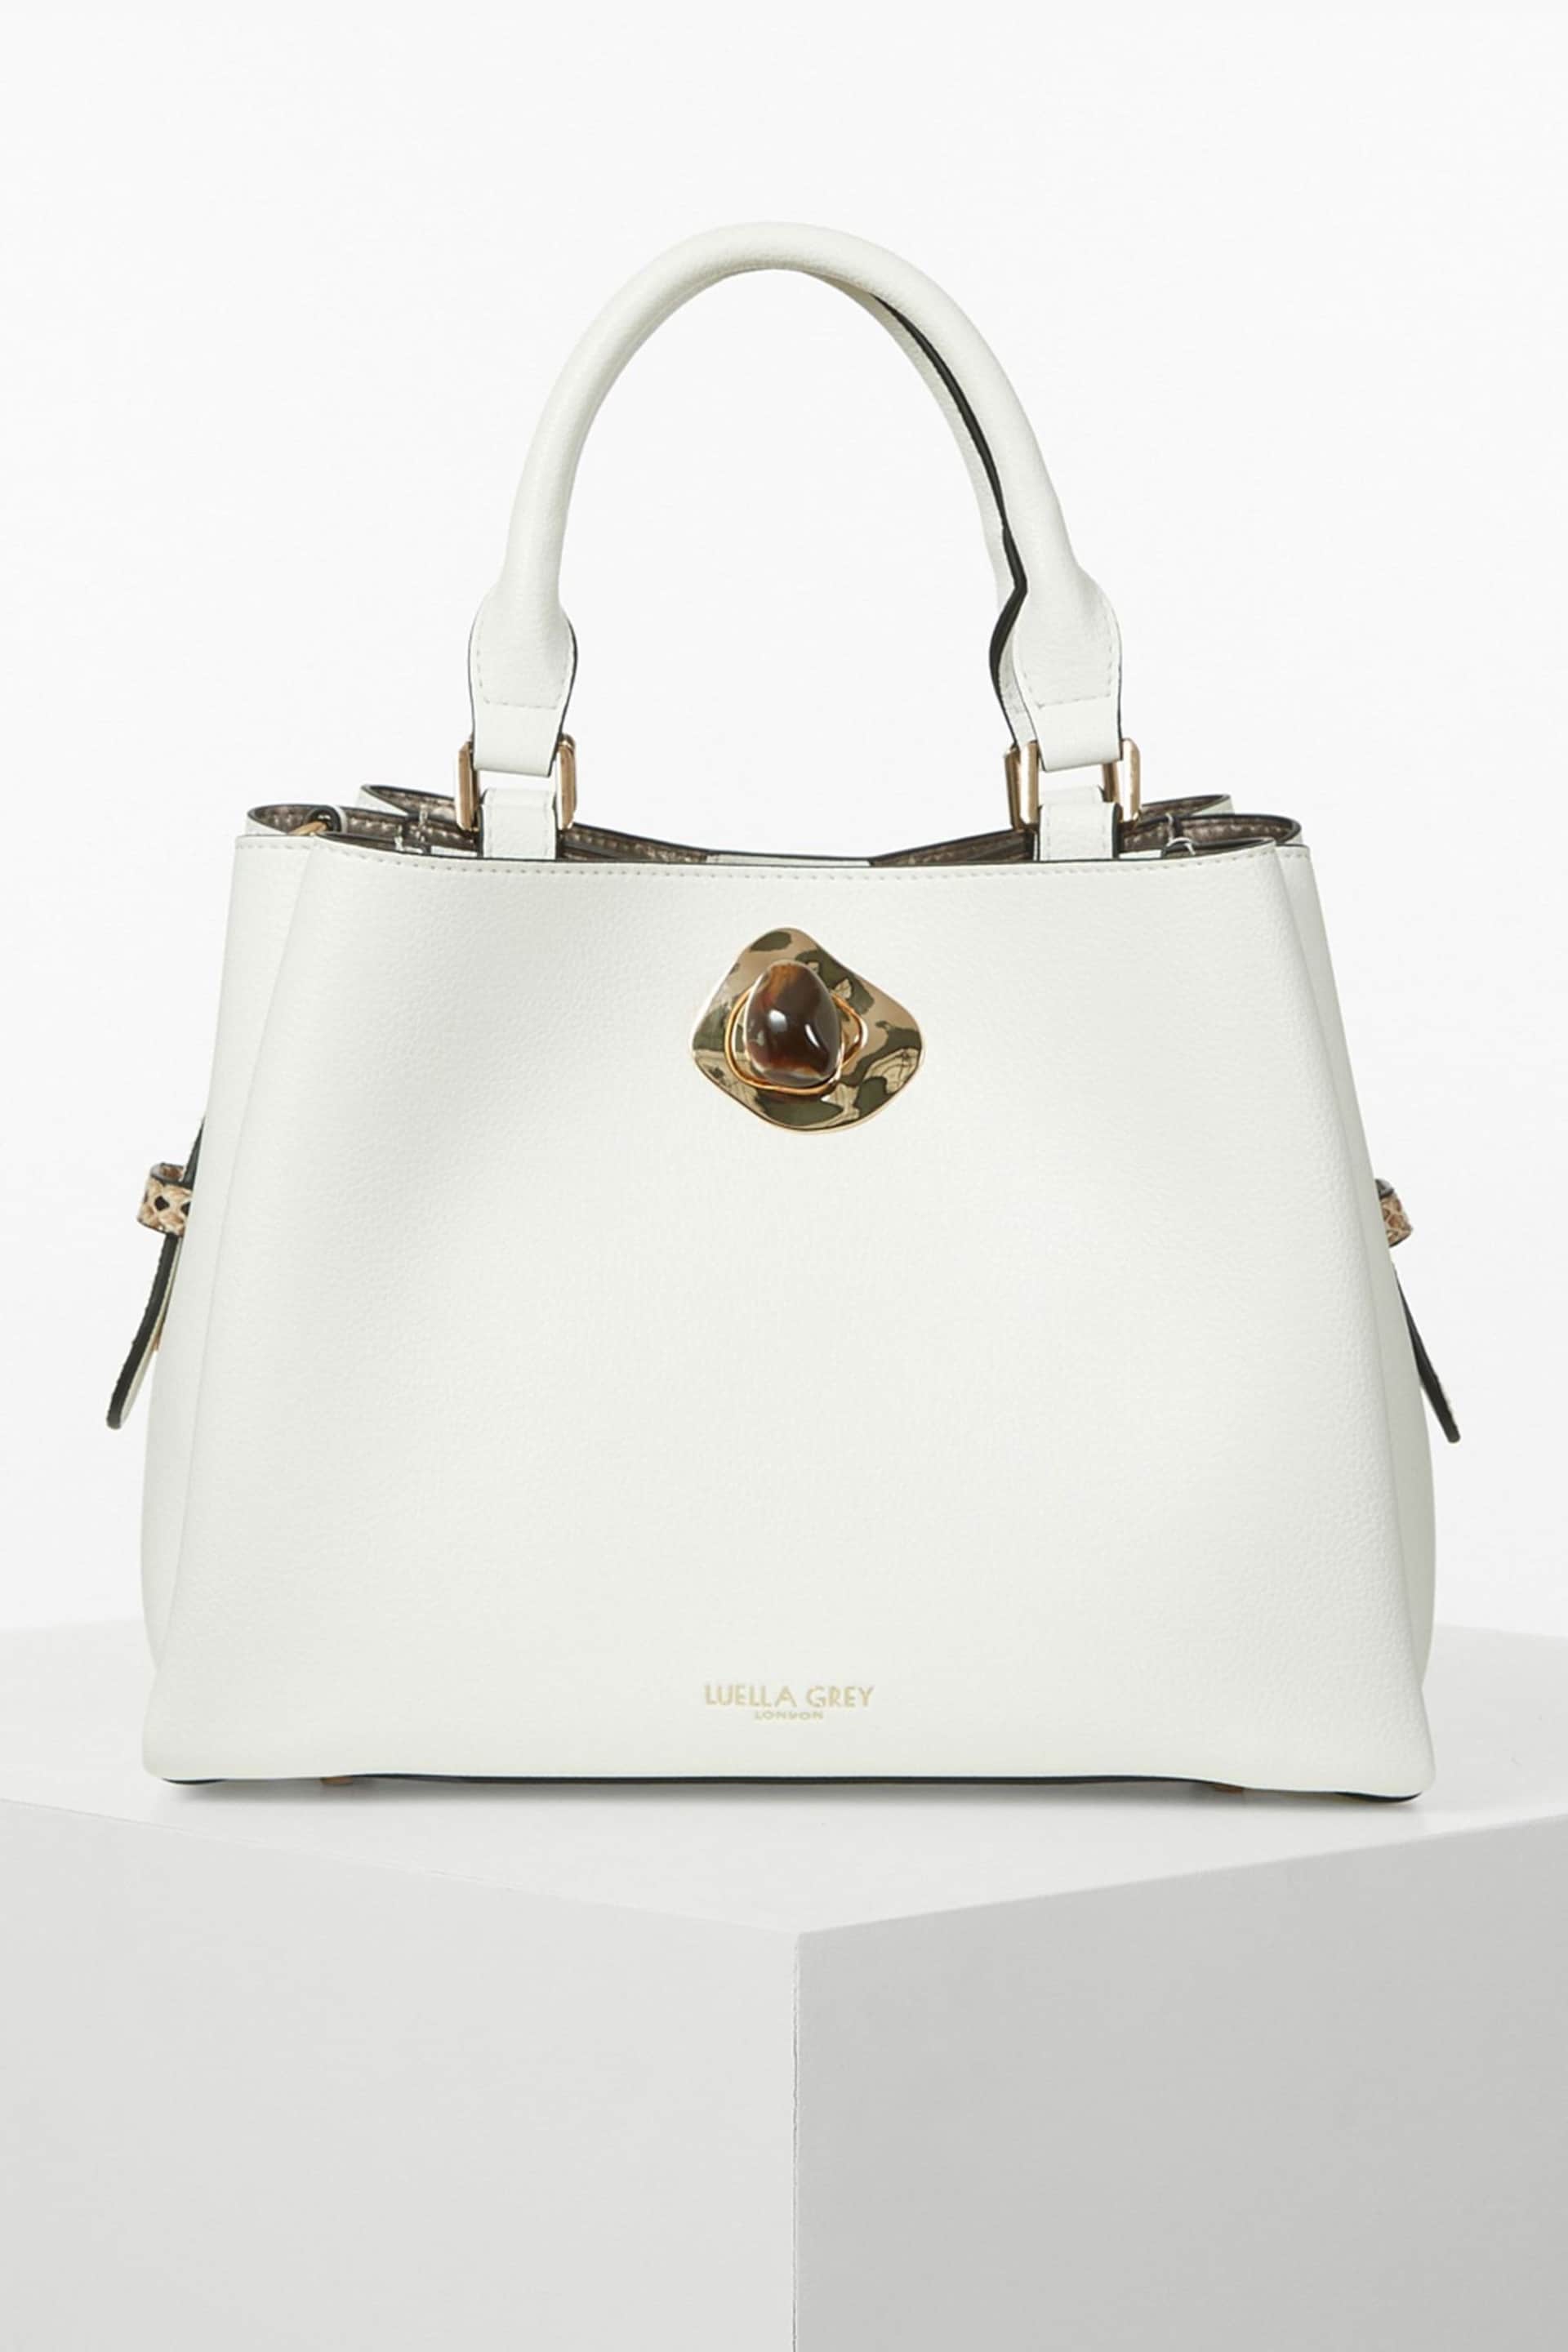 Luella Grey Margaux White Tote Cross-Body Bag - Image 4 of 6